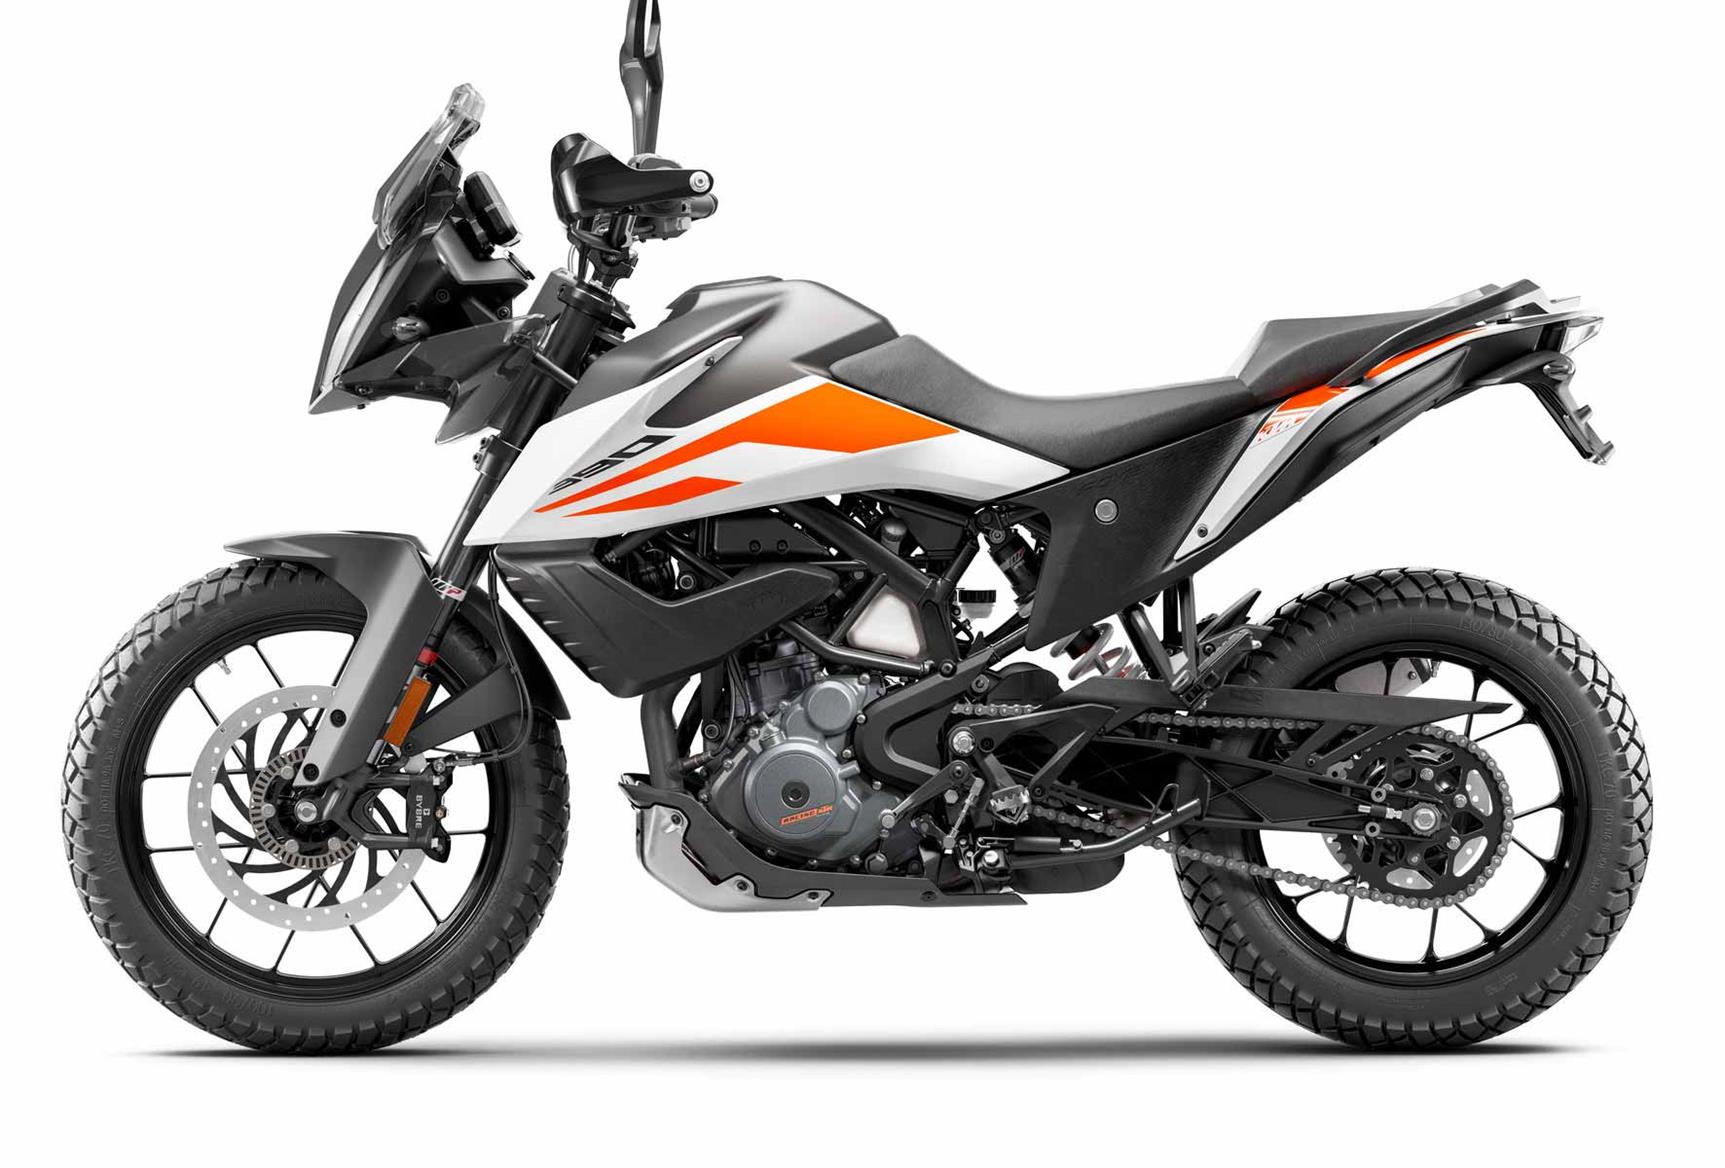 KTM's new 390 Adventure welcomes riders to the dirty side